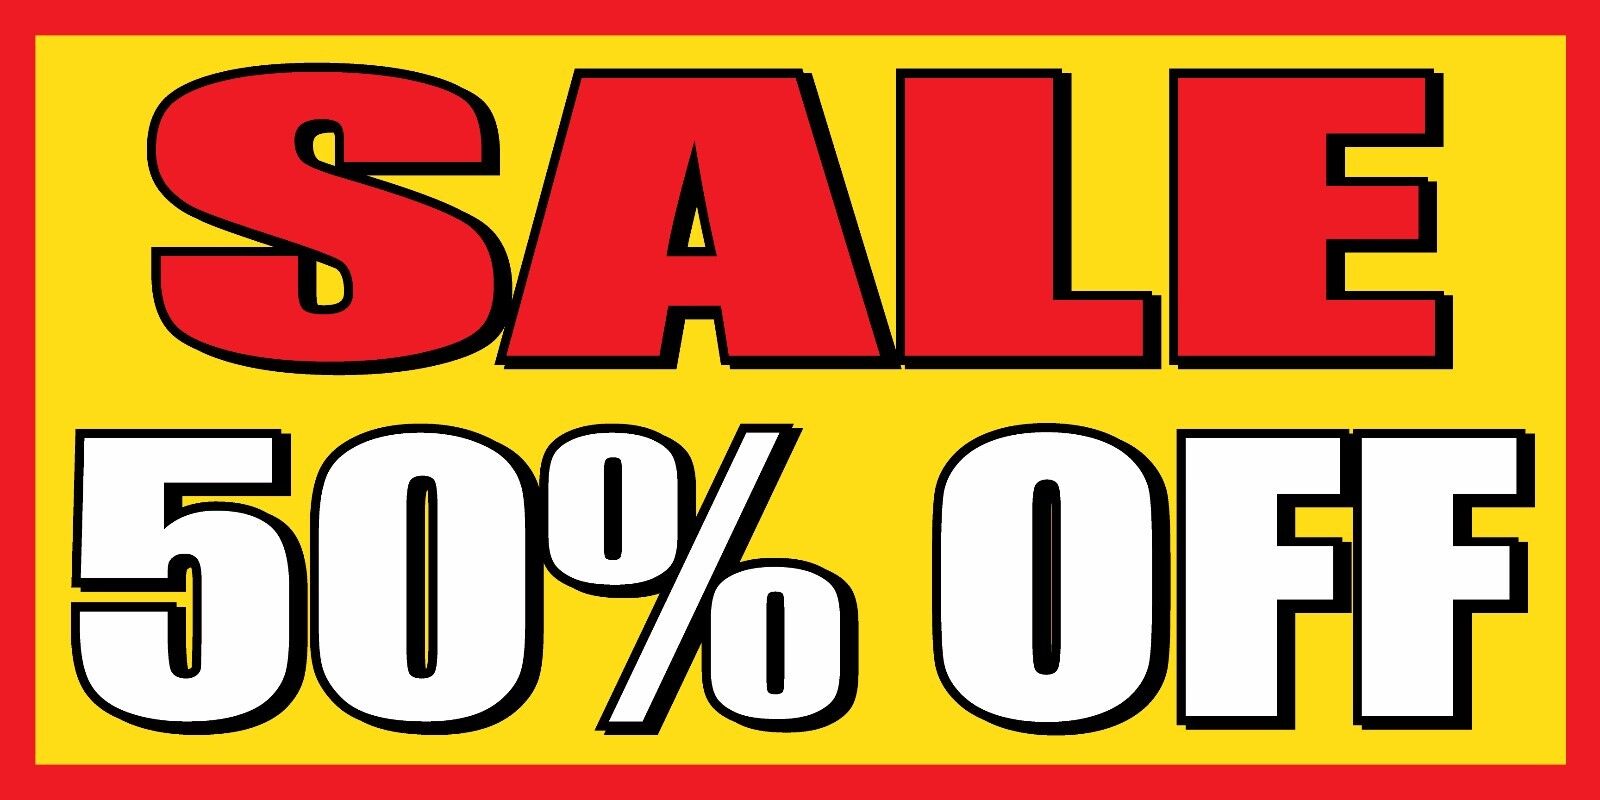 Red yellow and white 50% off sale banner